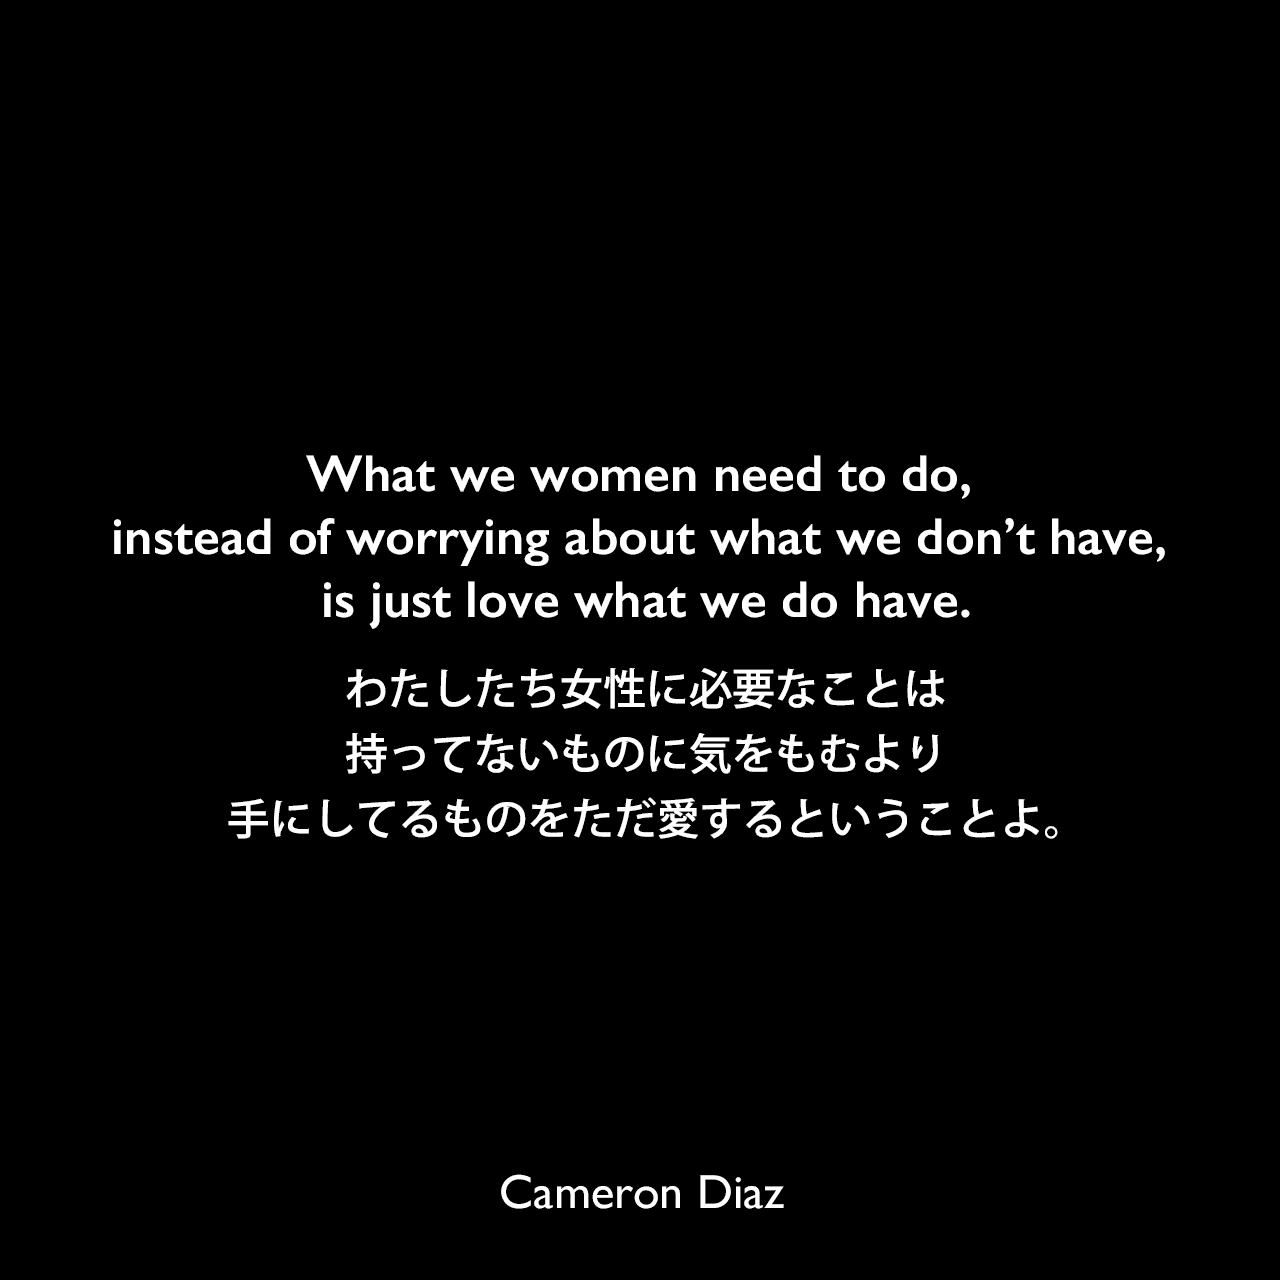 What we women need to do, instead of worrying about what we don’t have, is just love what we do have.わたしたち女性に必要なことは、持ってないものに気をもむより、手にしてるものをただ愛するということよ。Cameron Diaz